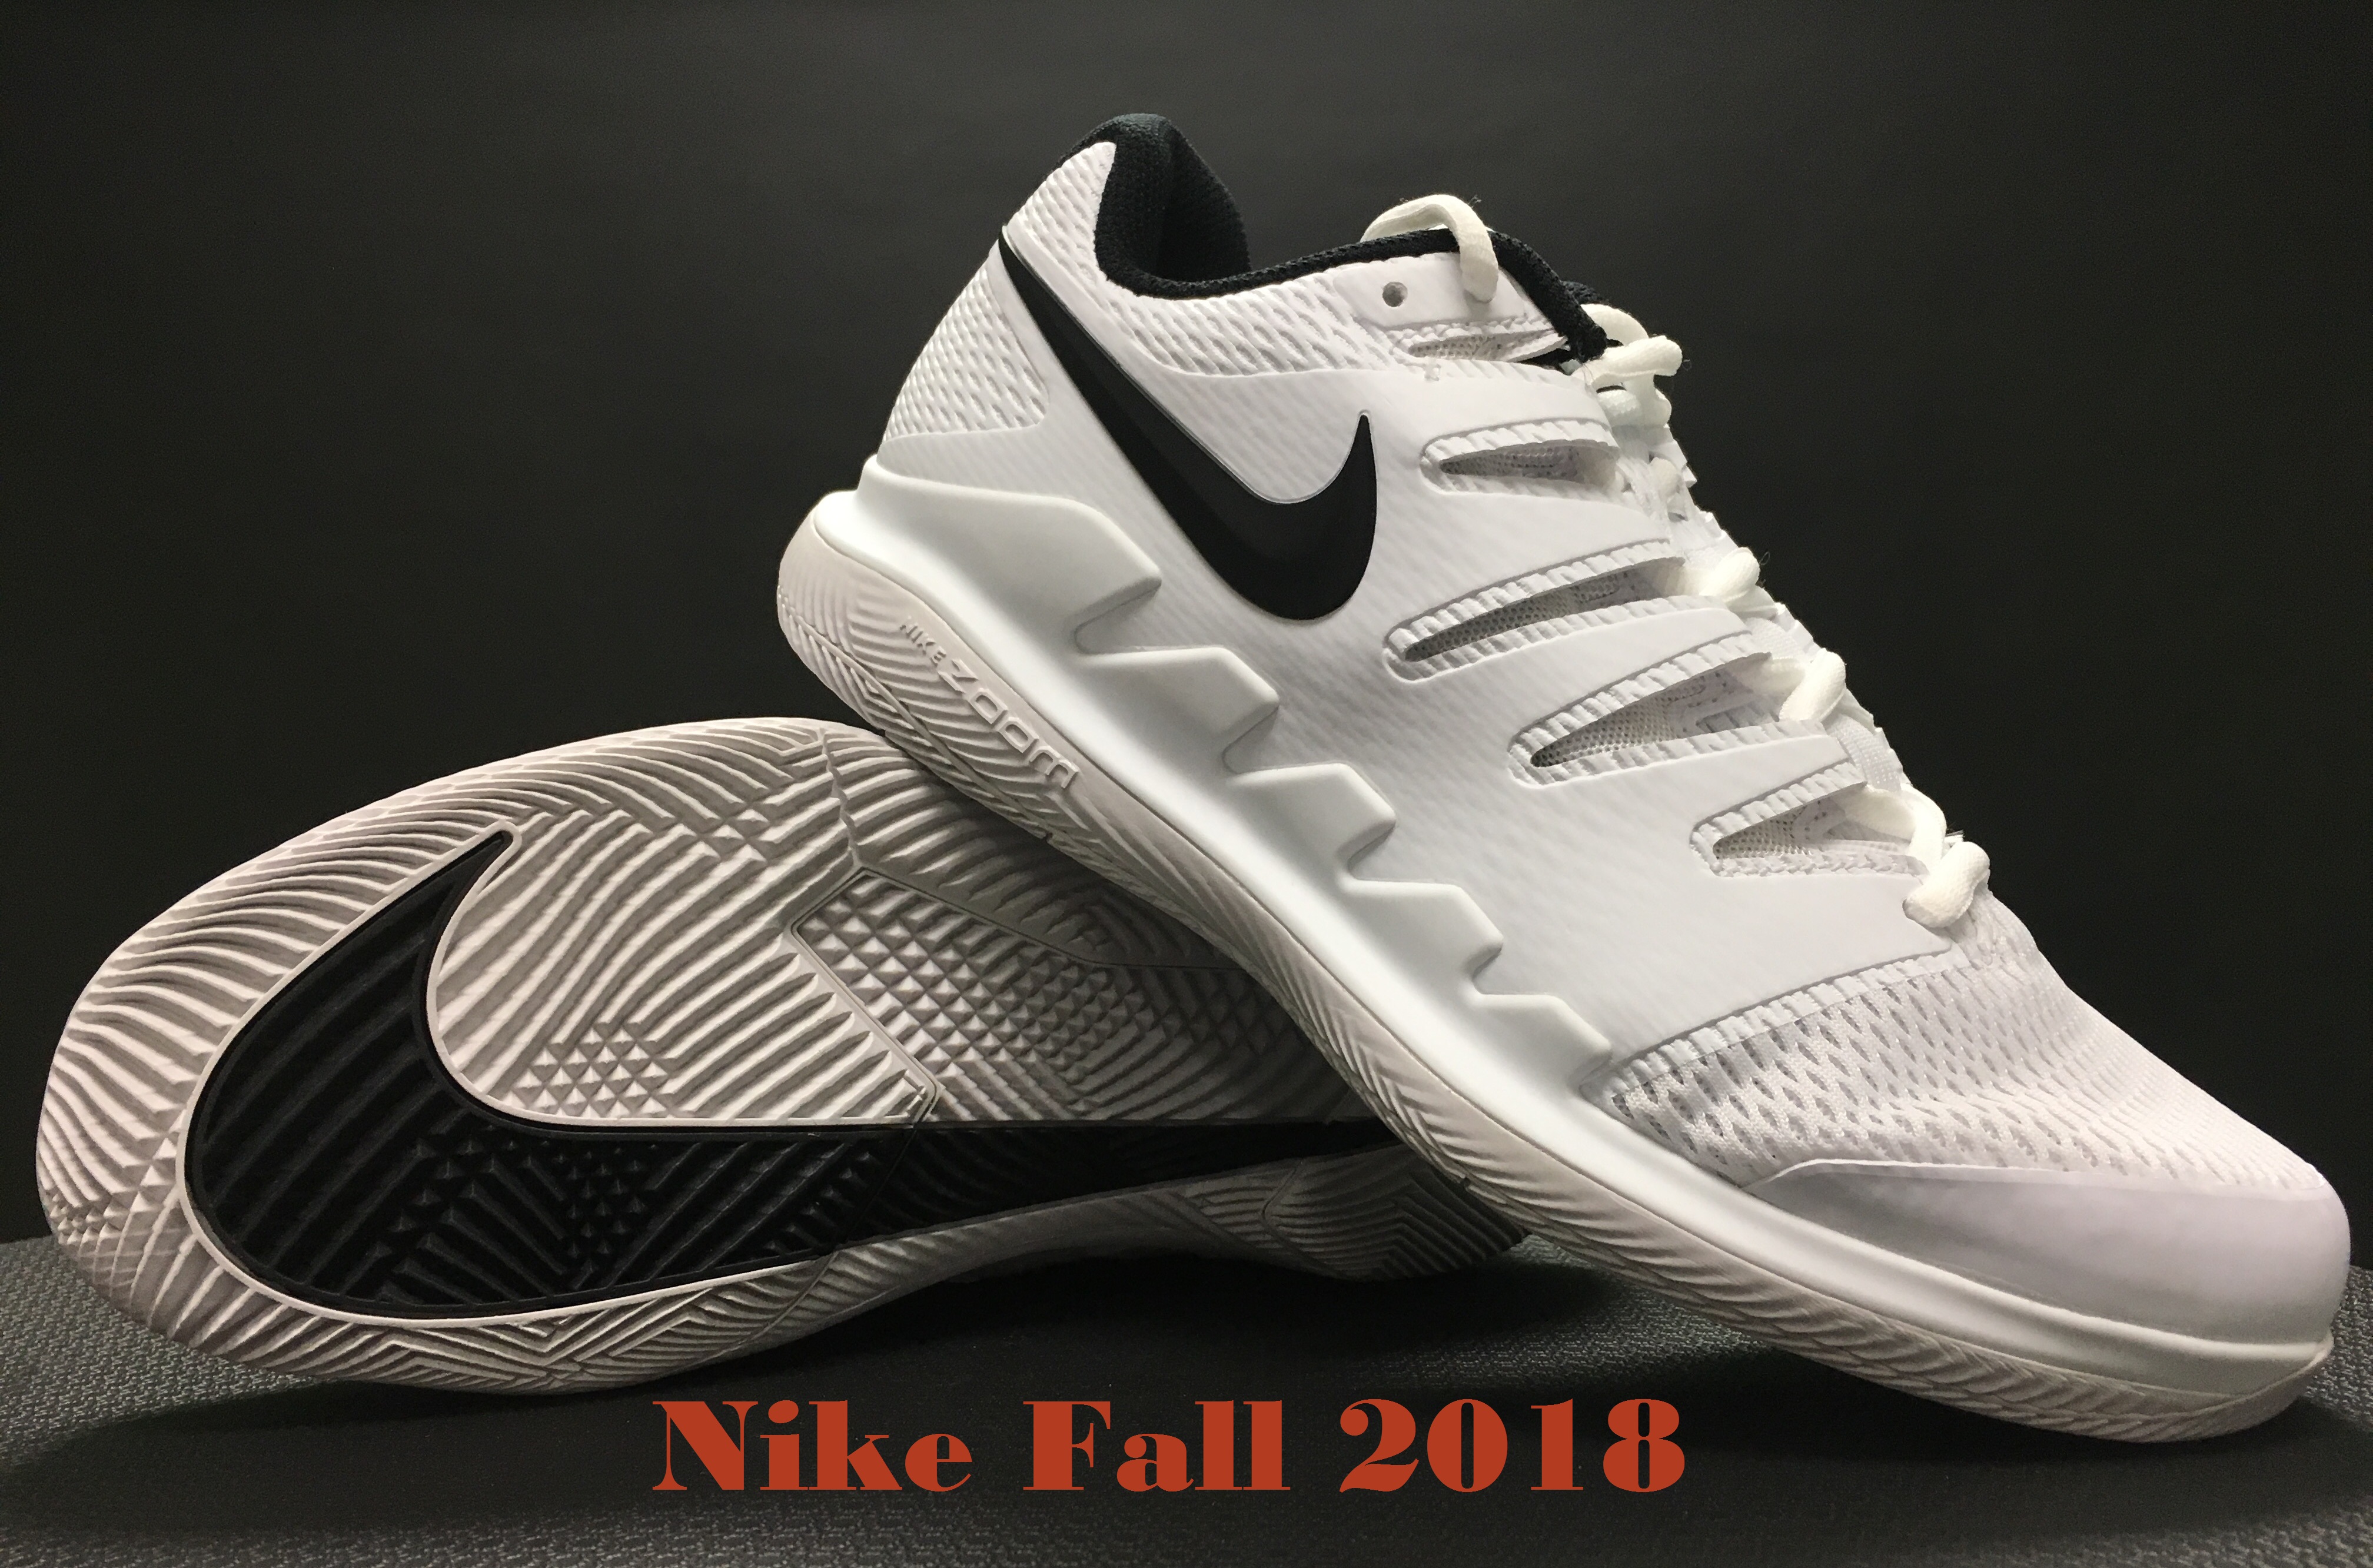 Nike Fall 2018 Tennis Shoes May Feature More Colors Than Autumn